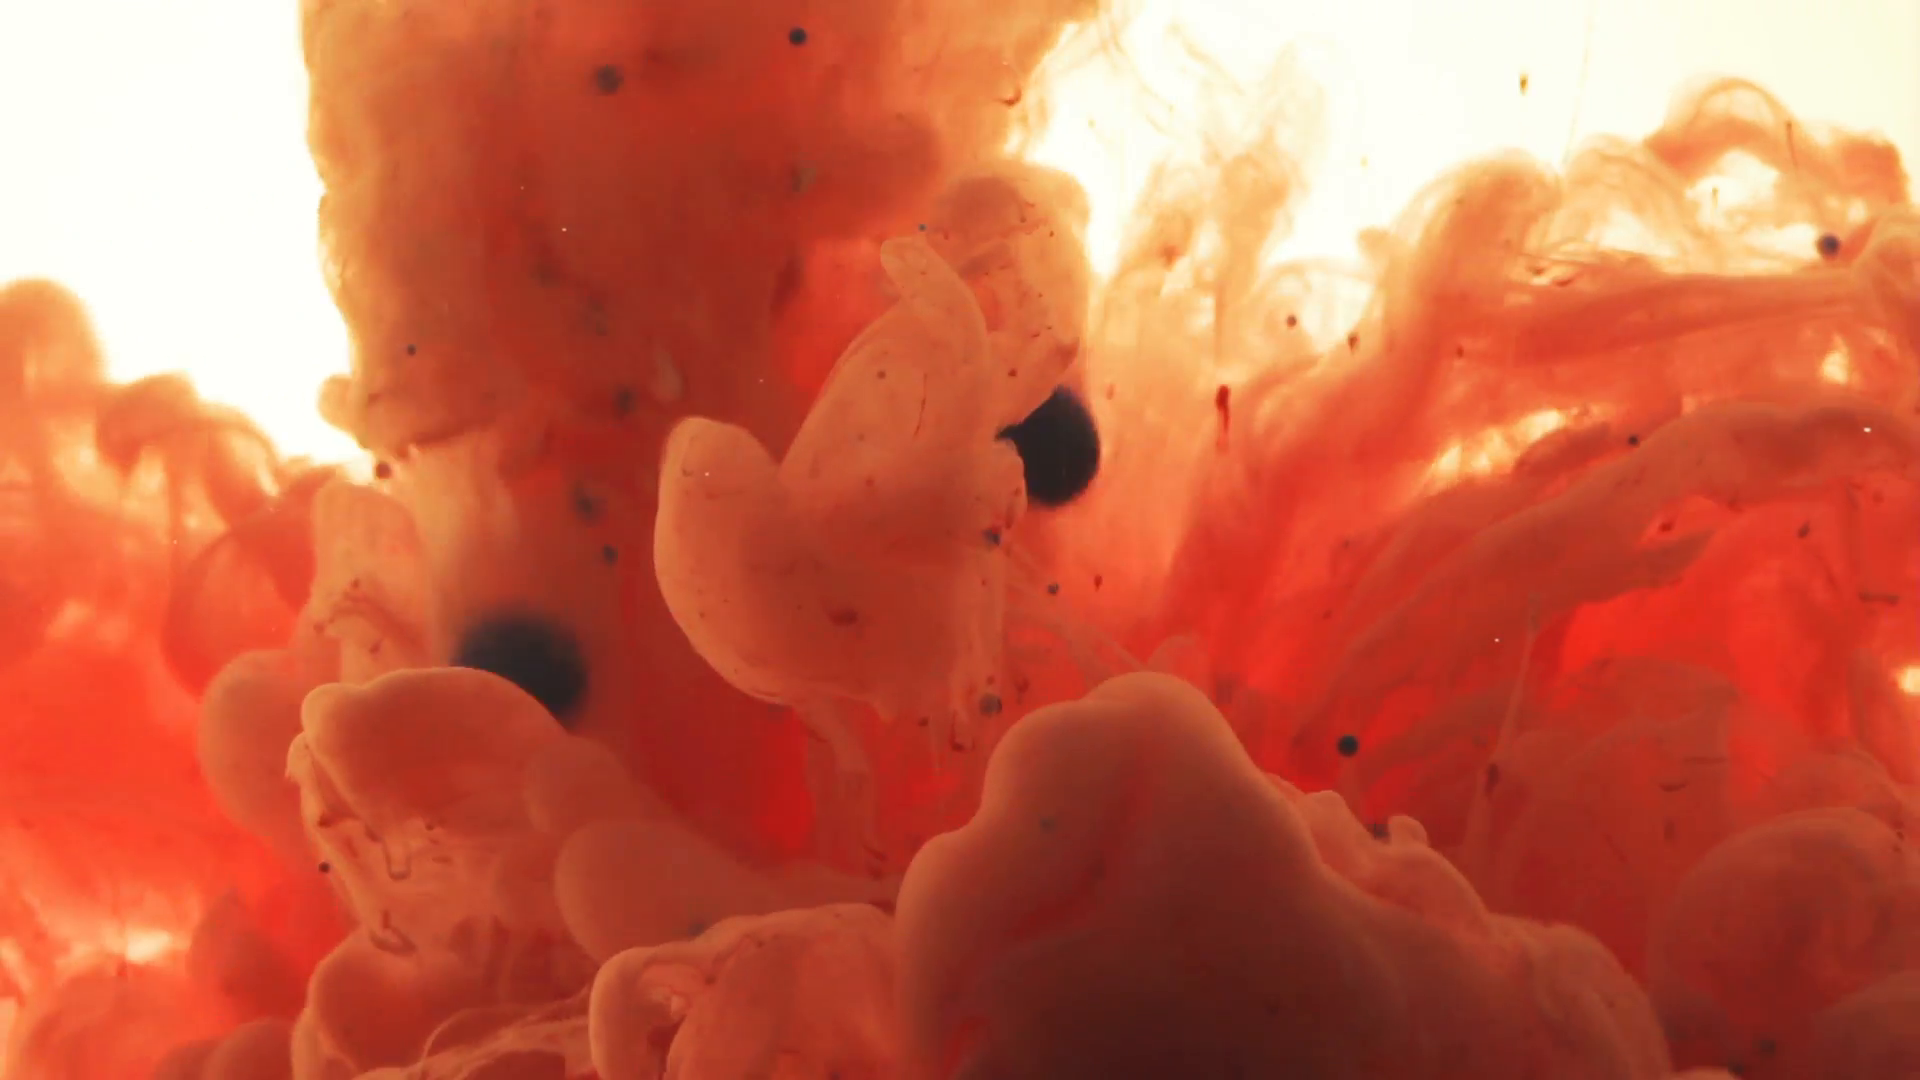 Liquid colors,yellow and red, mix underwater into orange. Bubbles ...